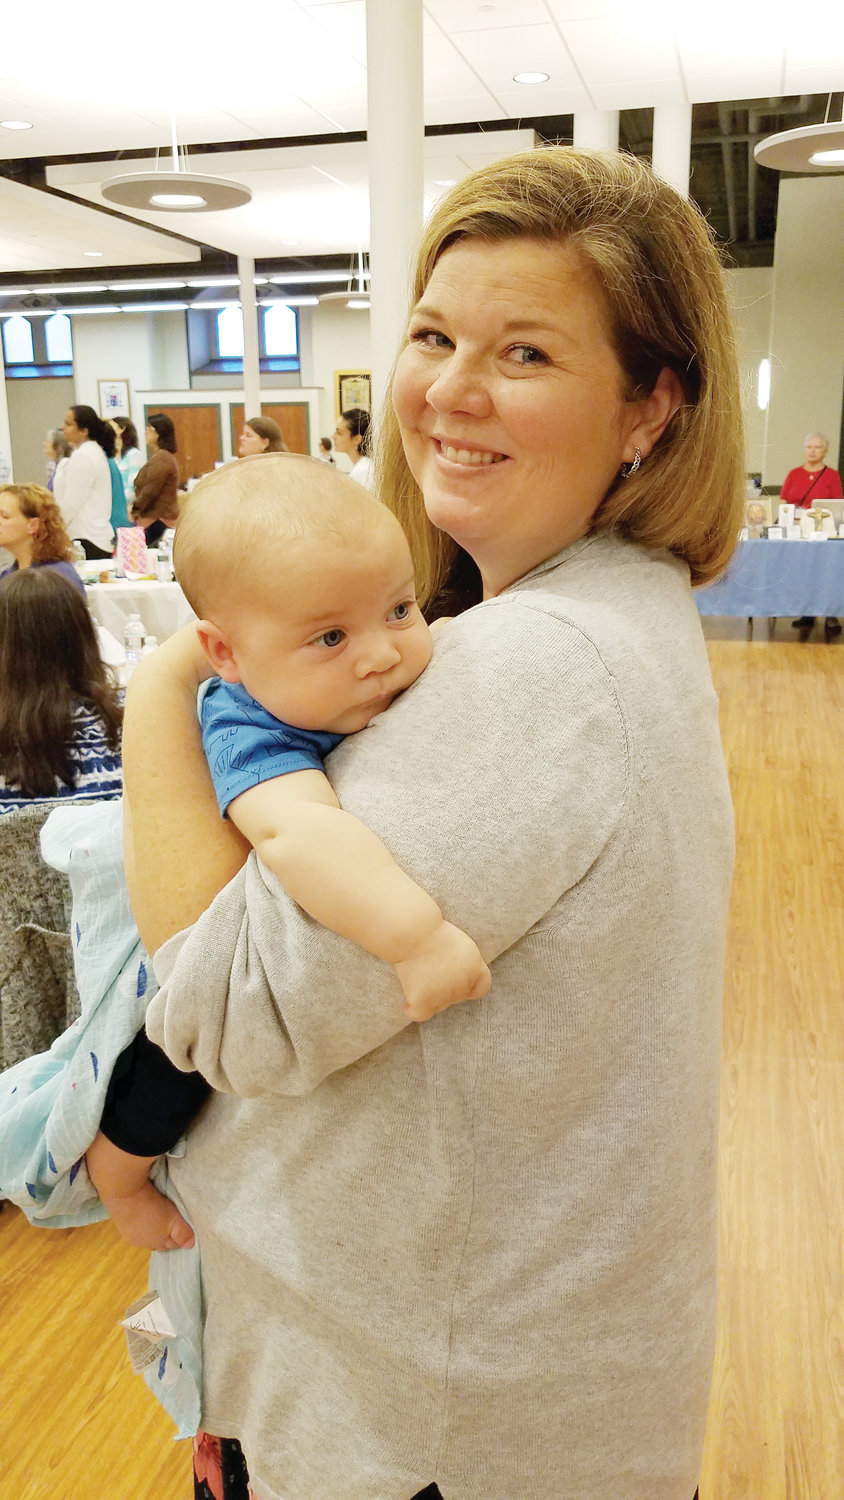 Breanne Trendowski from St. Francis Xavier in Acushnet, Mass., and her baby Silas take part in the annual Rhode Island Women’s Conference.